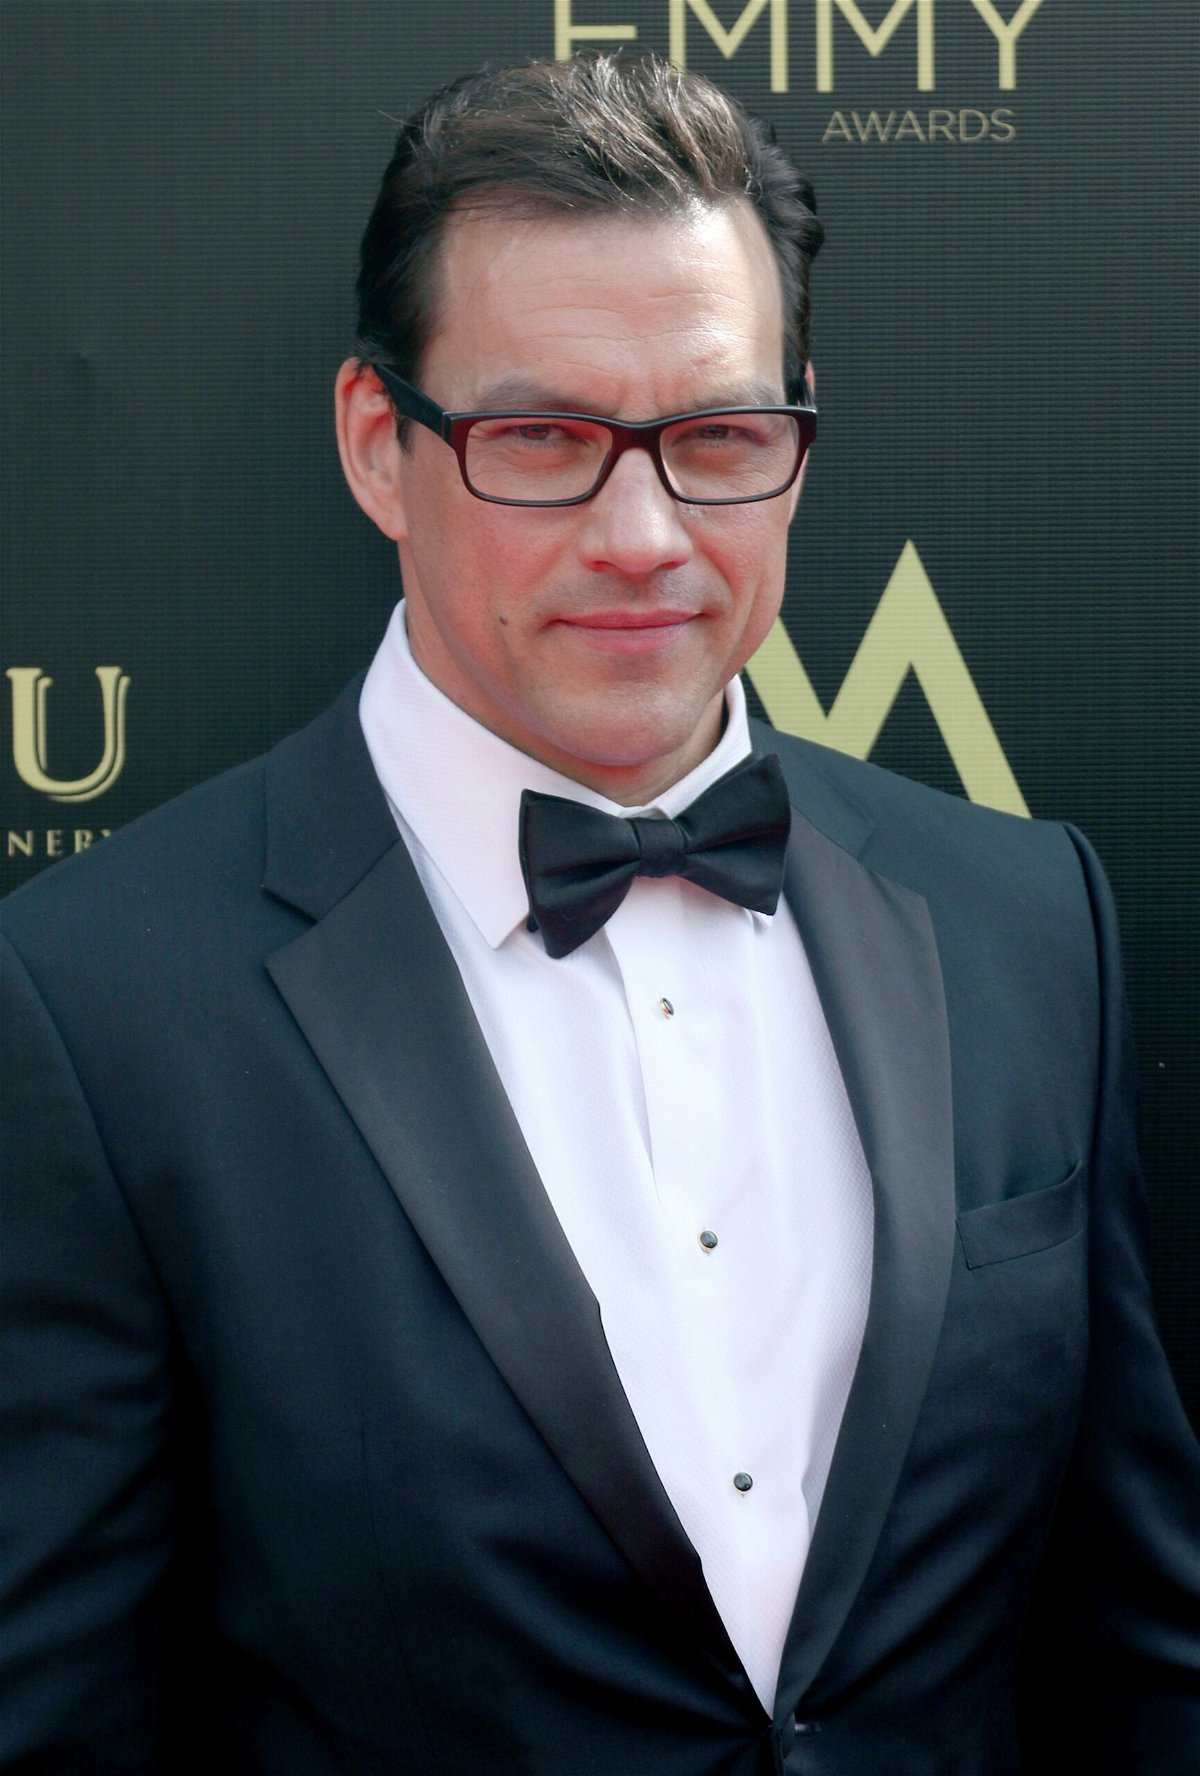 Tyler Christopher seen  at the 2018 Daytime Emmy Awards in Pasadena, known for his roles on “General Hospital” and “Days of Our Lives,” has died aged 50.